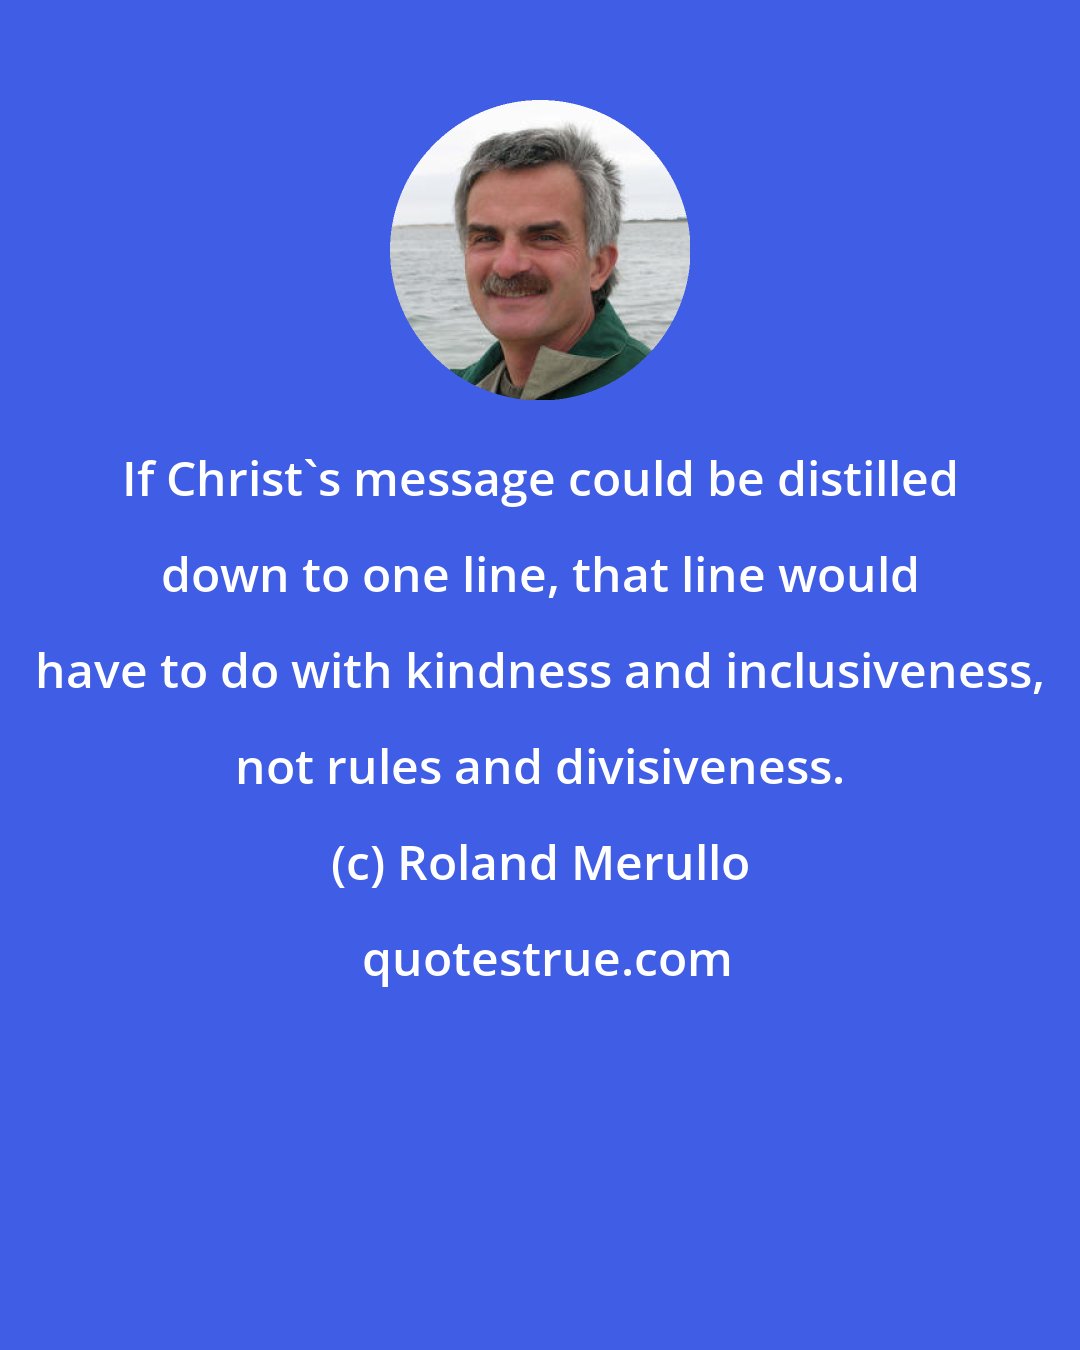 Roland Merullo: If Christ's message could be distilled down to one line, that line would have to do with kindness and inclusiveness, not rules and divisiveness.